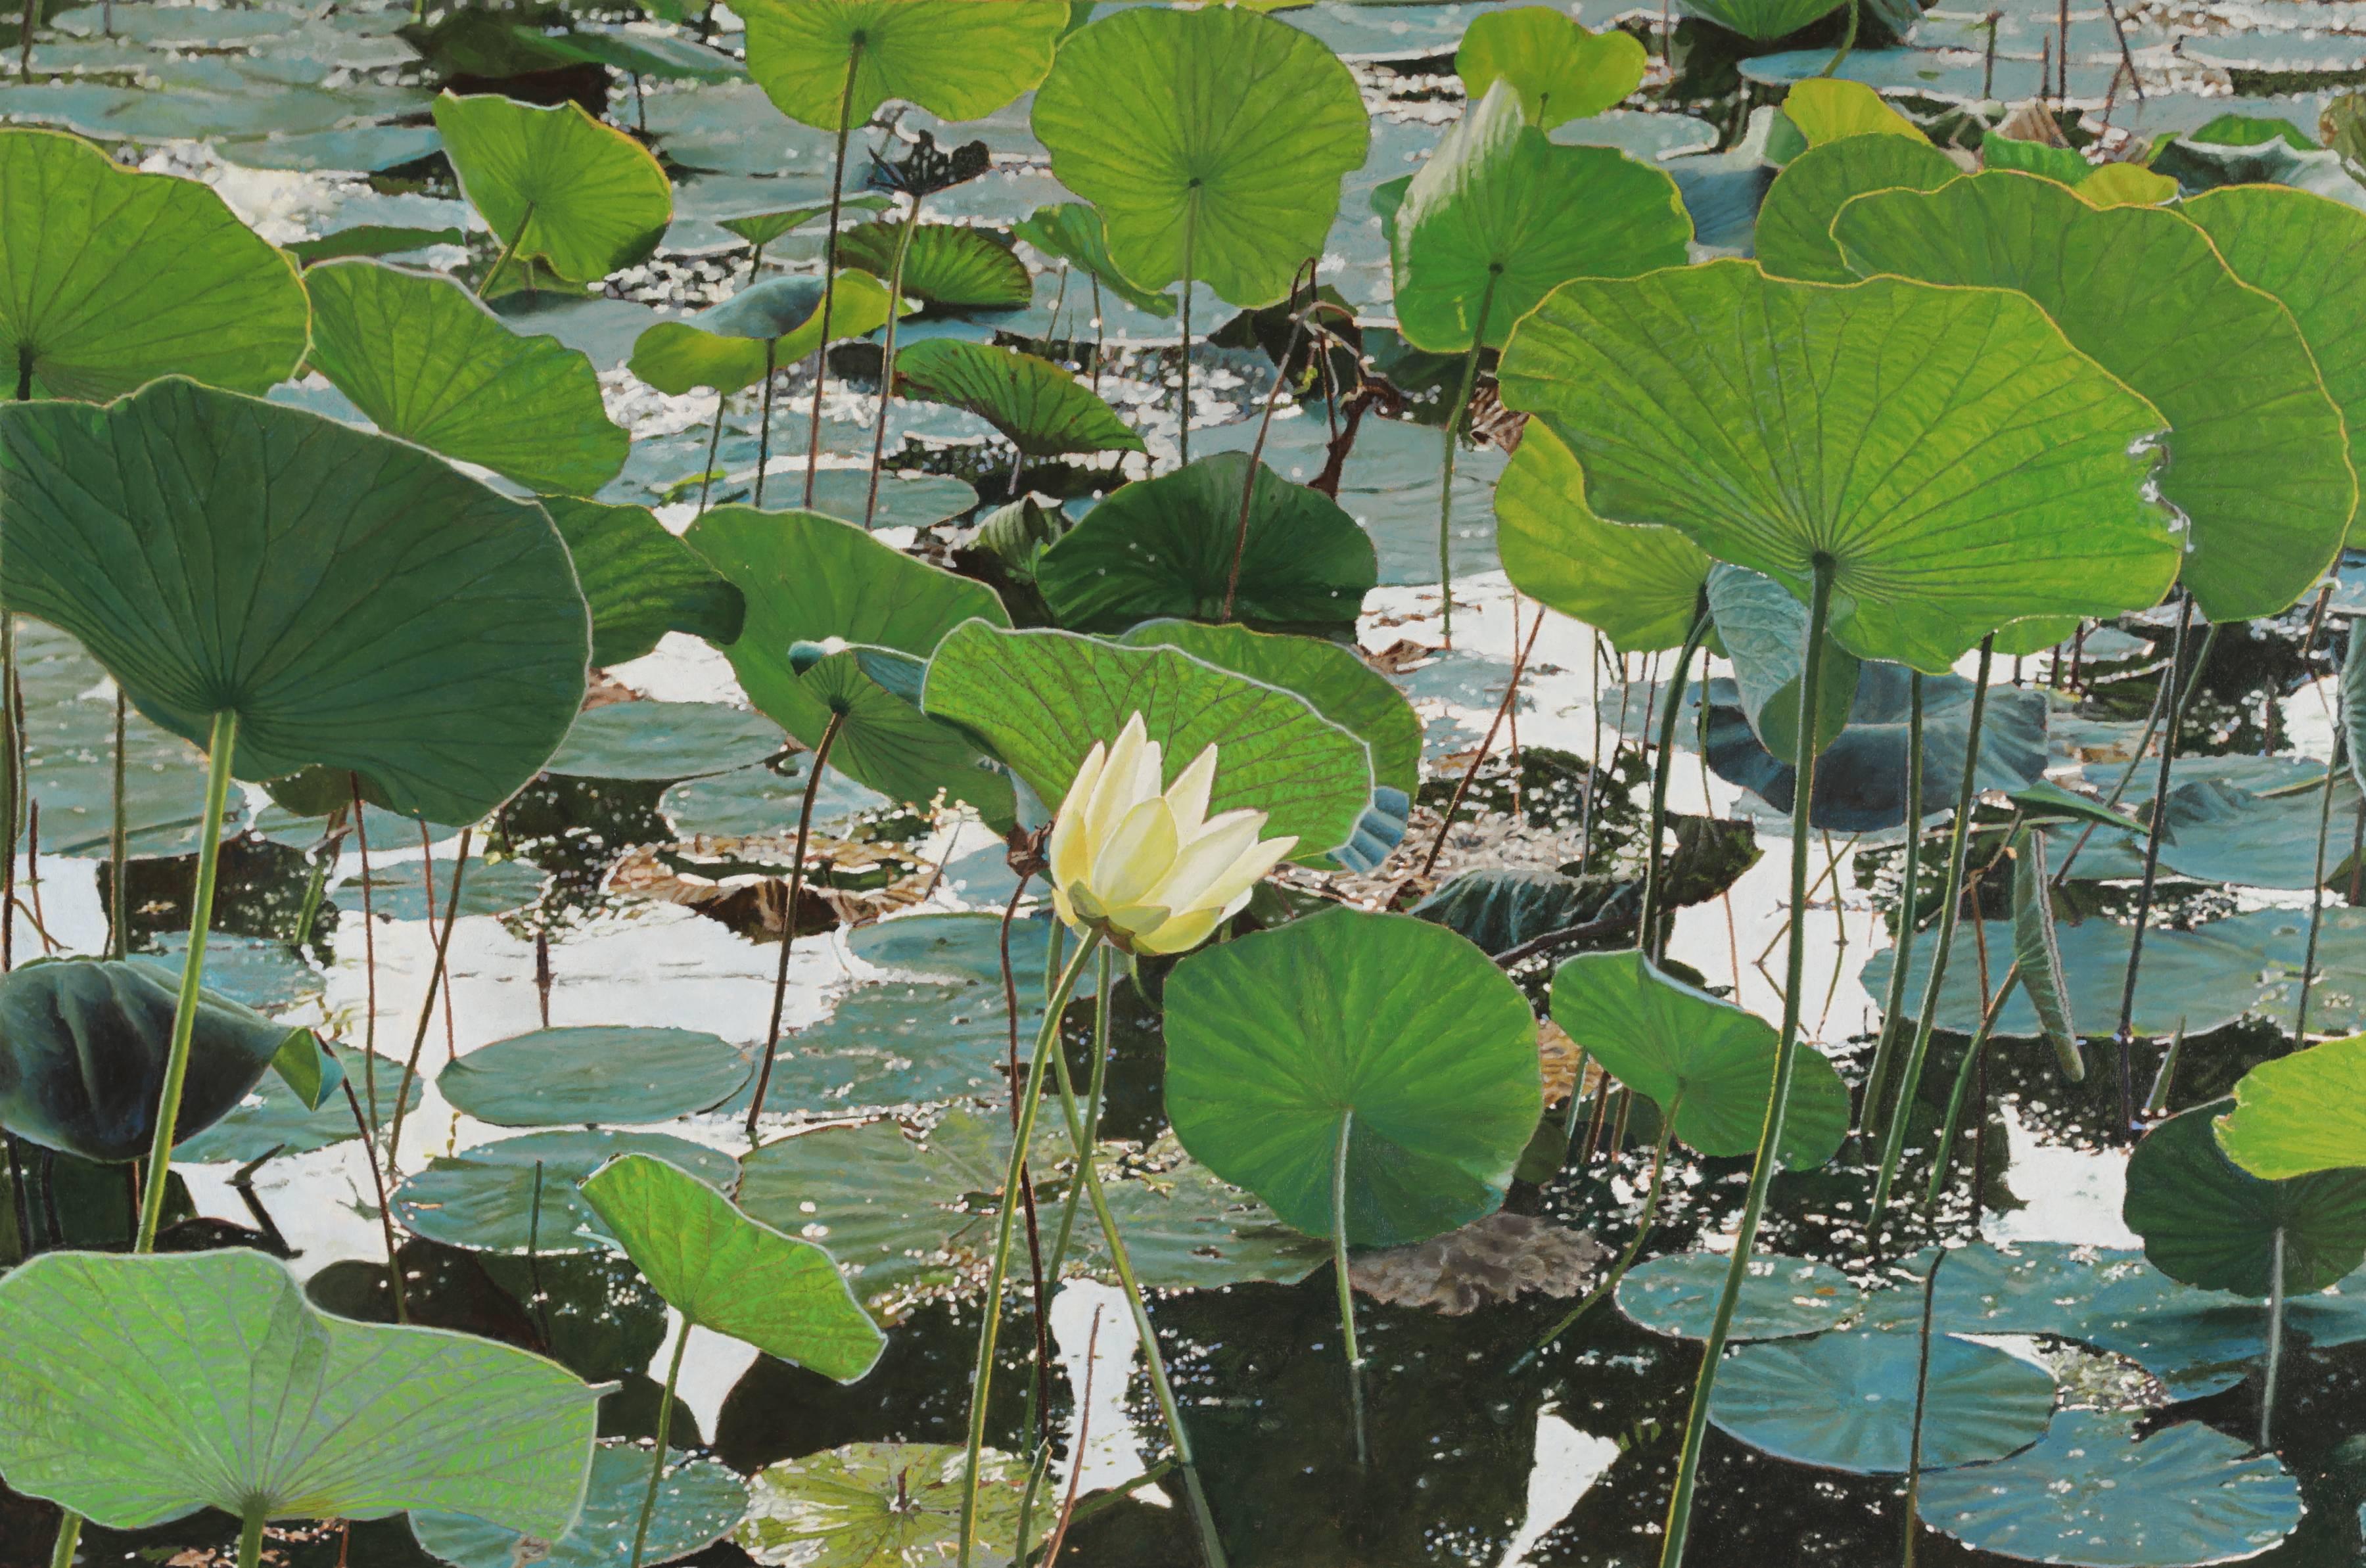 Jeffrey Vaughn Landscape Painting - "Lotus Flower", Contemporary Framed Photorealistic Oil Painting on Canvas